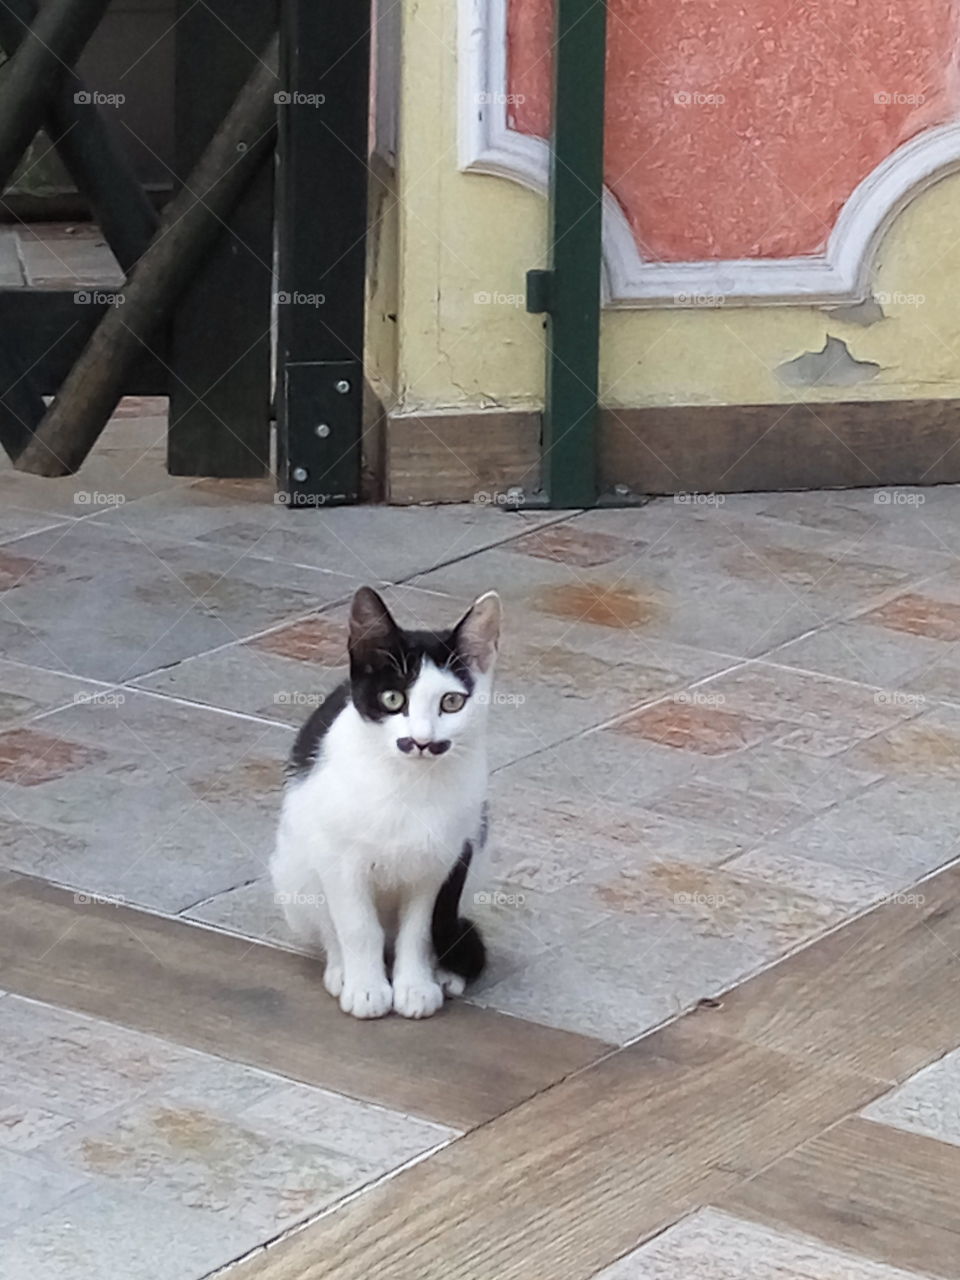 Mustache cat seen at cafe